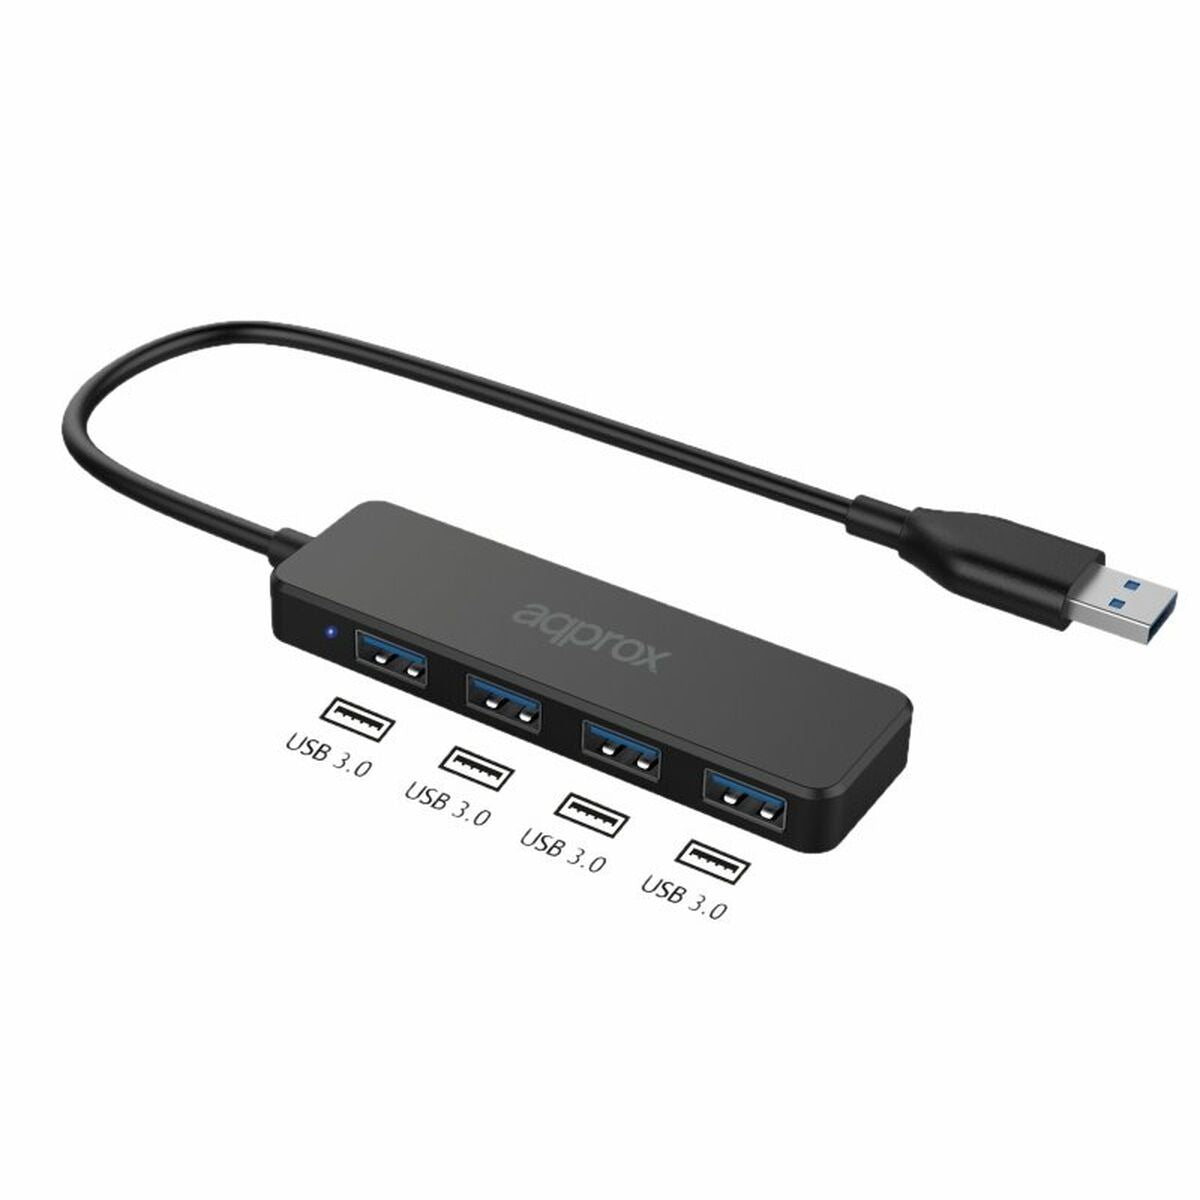 USB Hub approx! APPC49 4 Ports, approx!, Computing, Accessories, usb-hub-approx-appc49-4-ports, Brand_approx!, category-reference-2609, category-reference-2803, category-reference-2829, category-reference-t-19685, category-reference-t-19908, Condition_NEW, networks/wiring, Price_20 - 50, Teleworking, RiotNook